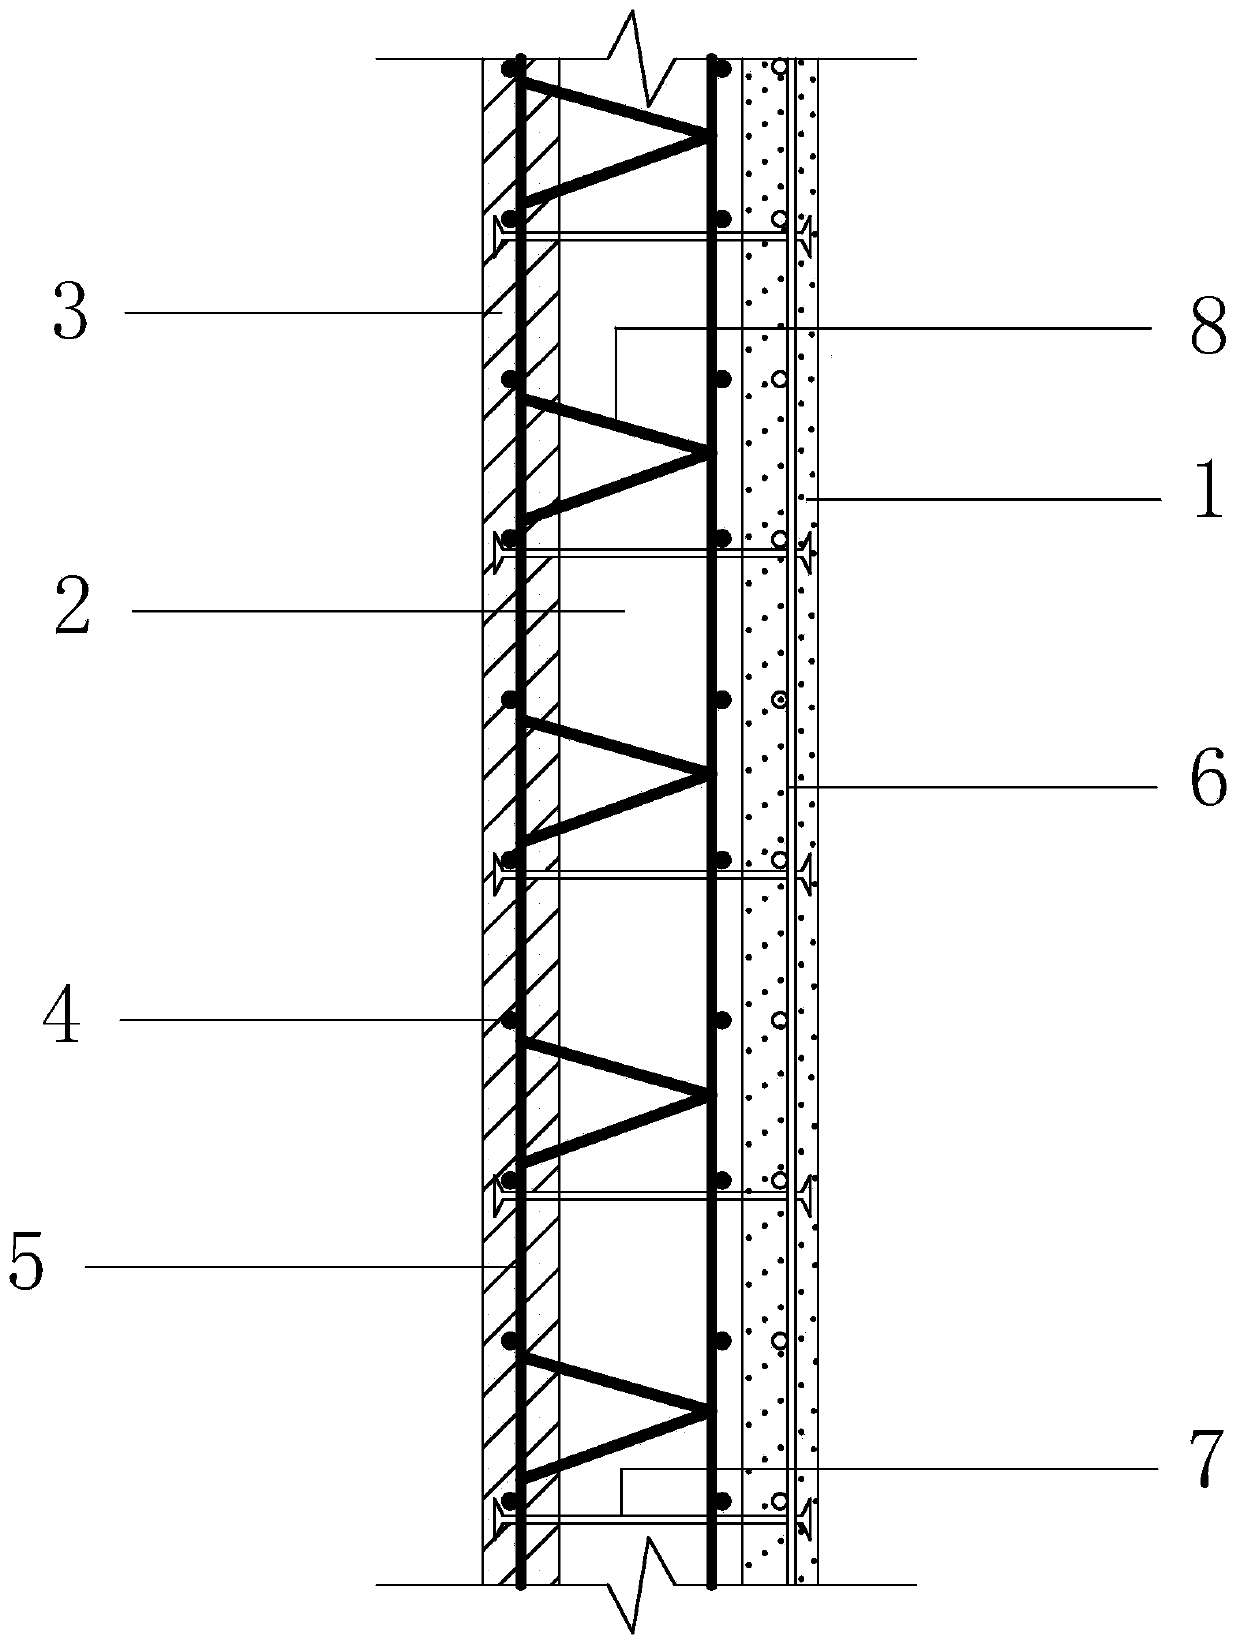 Fabricated self-insulation single face laminated shearing force wall board and casting method thereof